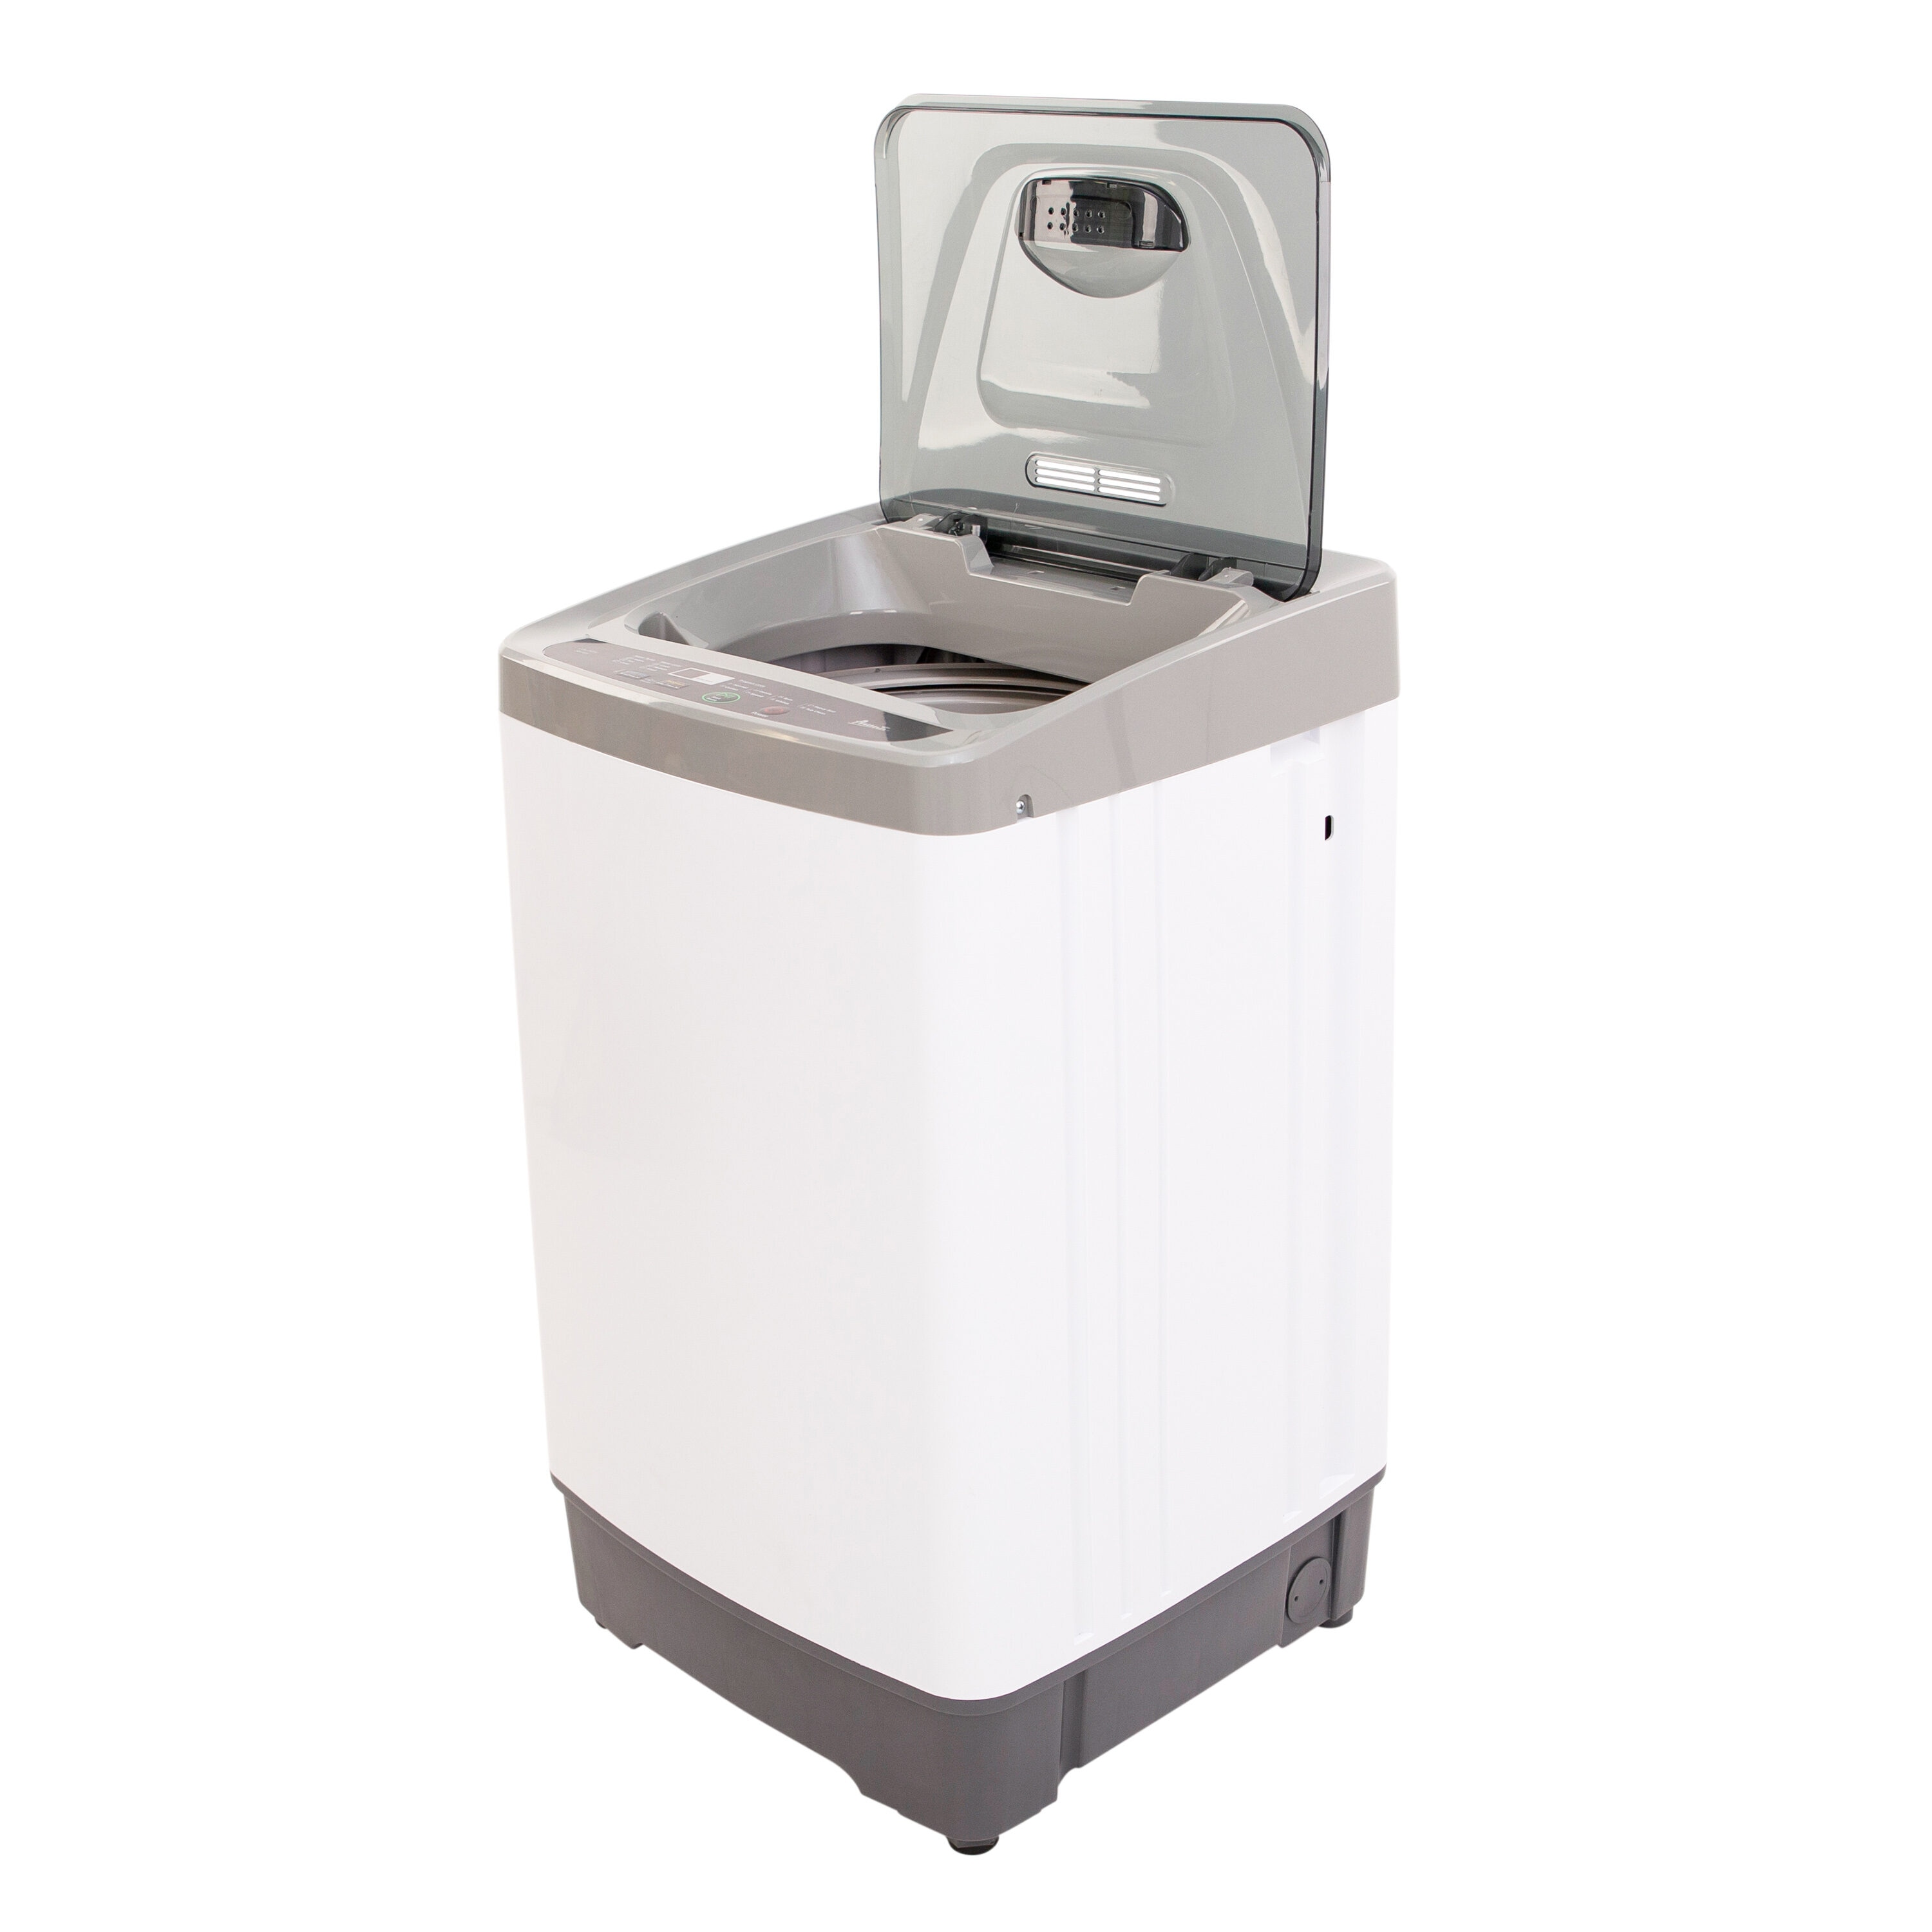 Portable Washer Machines